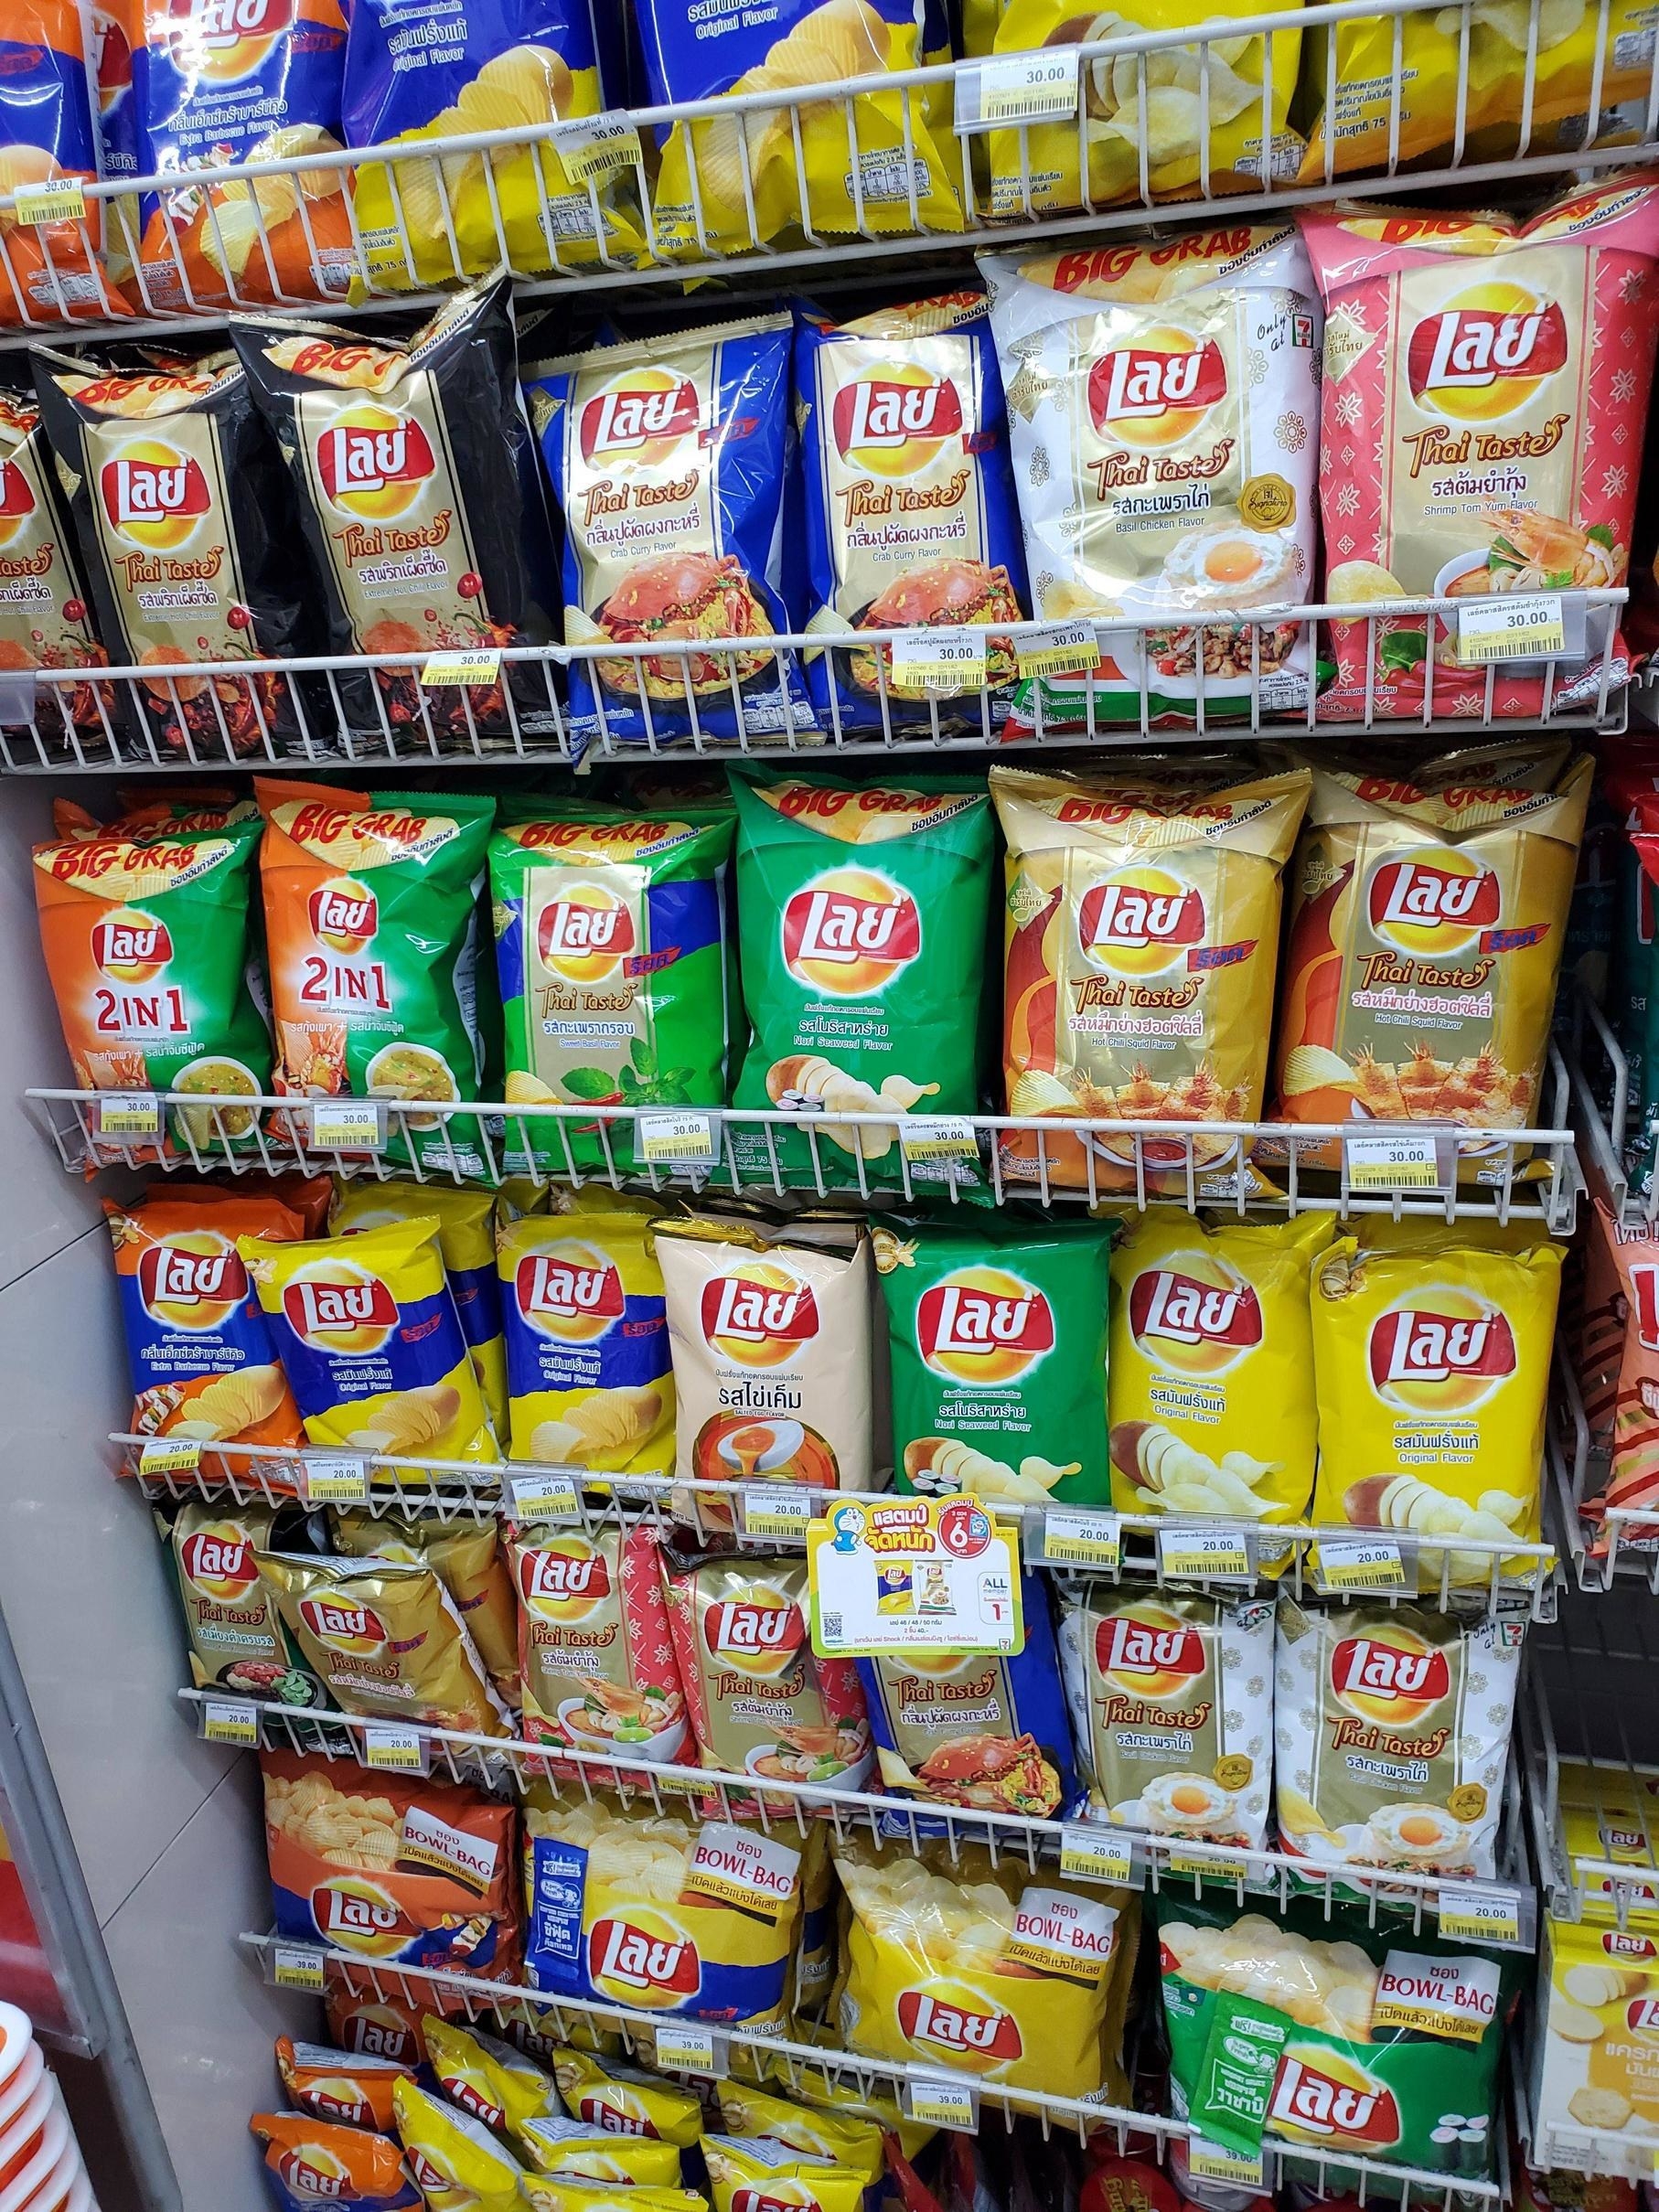 A whole wall of different flavored Lays chips